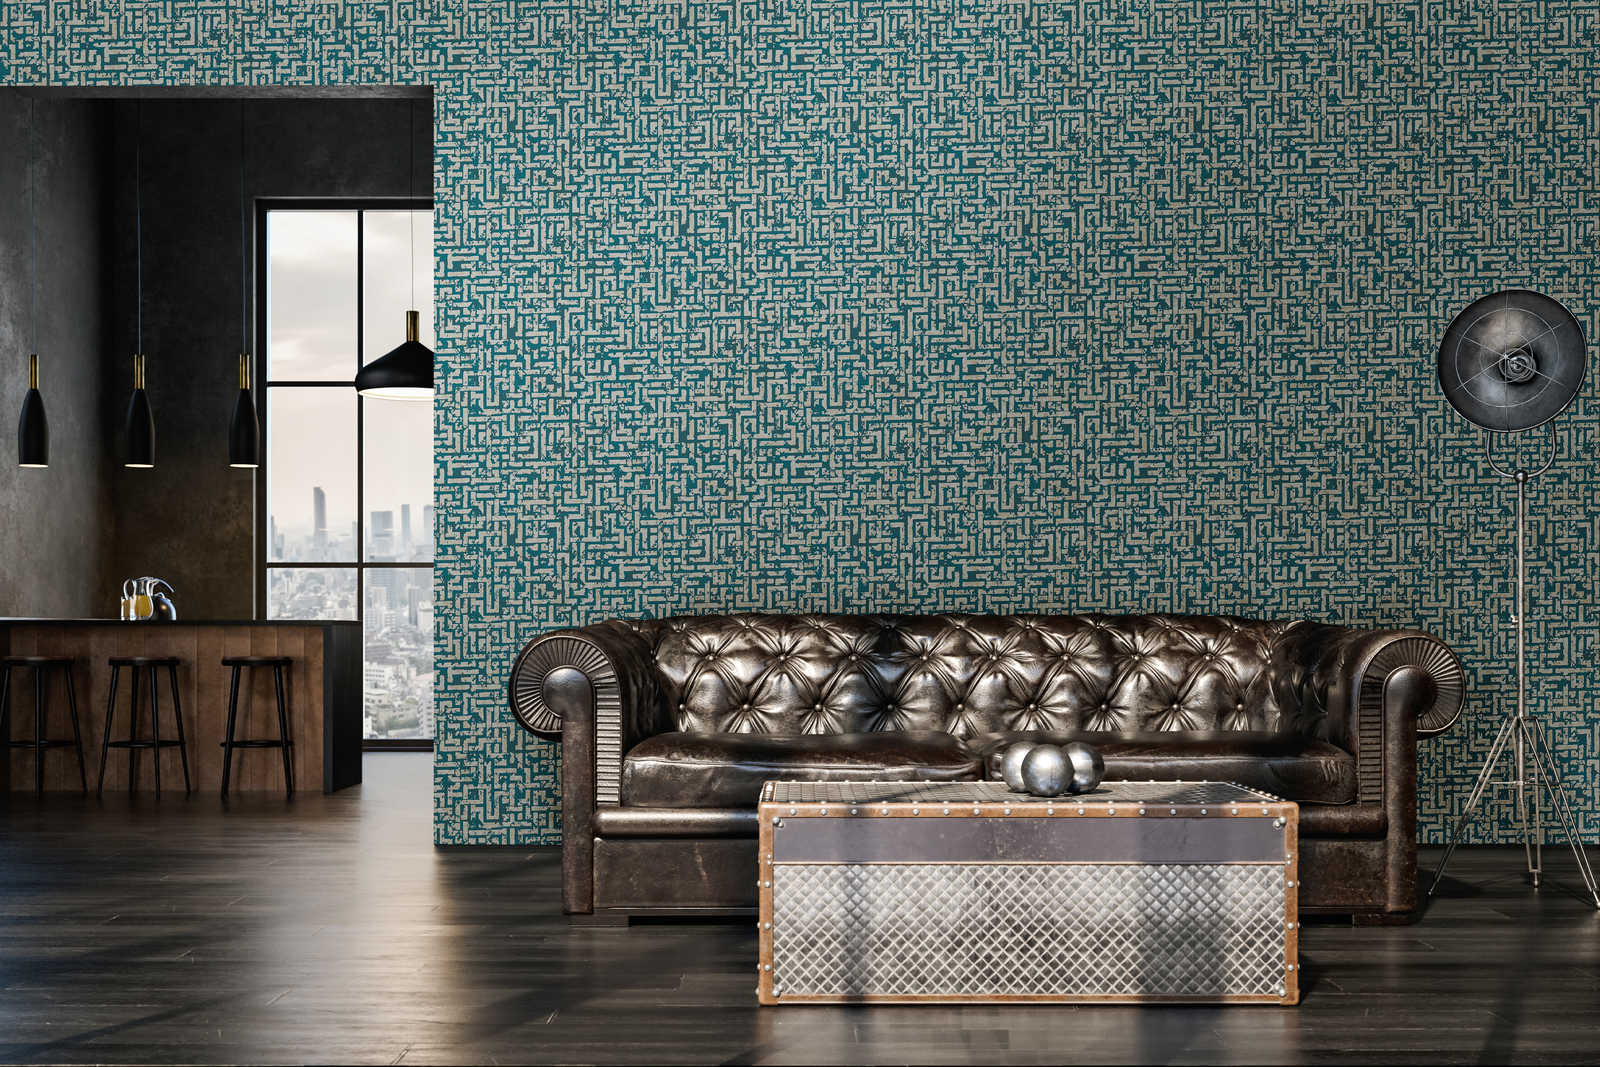             Ethno wallpaper with graphic relief design - blue, green, beige
        